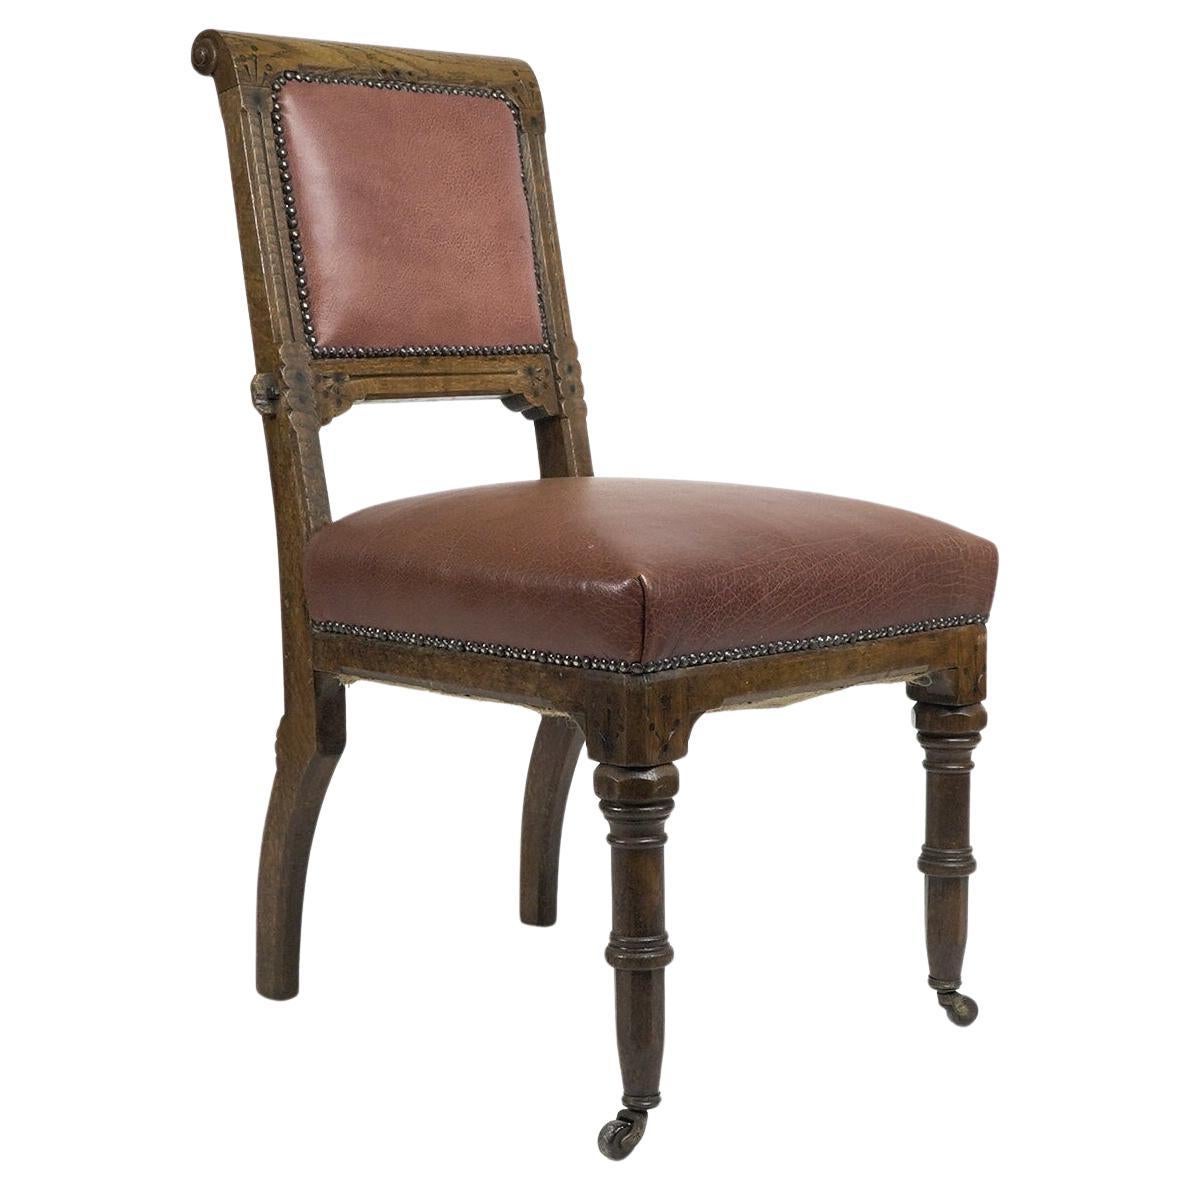 Charles Bevan attributed. A Gothic Revival side chair with scroll carvings For Sale